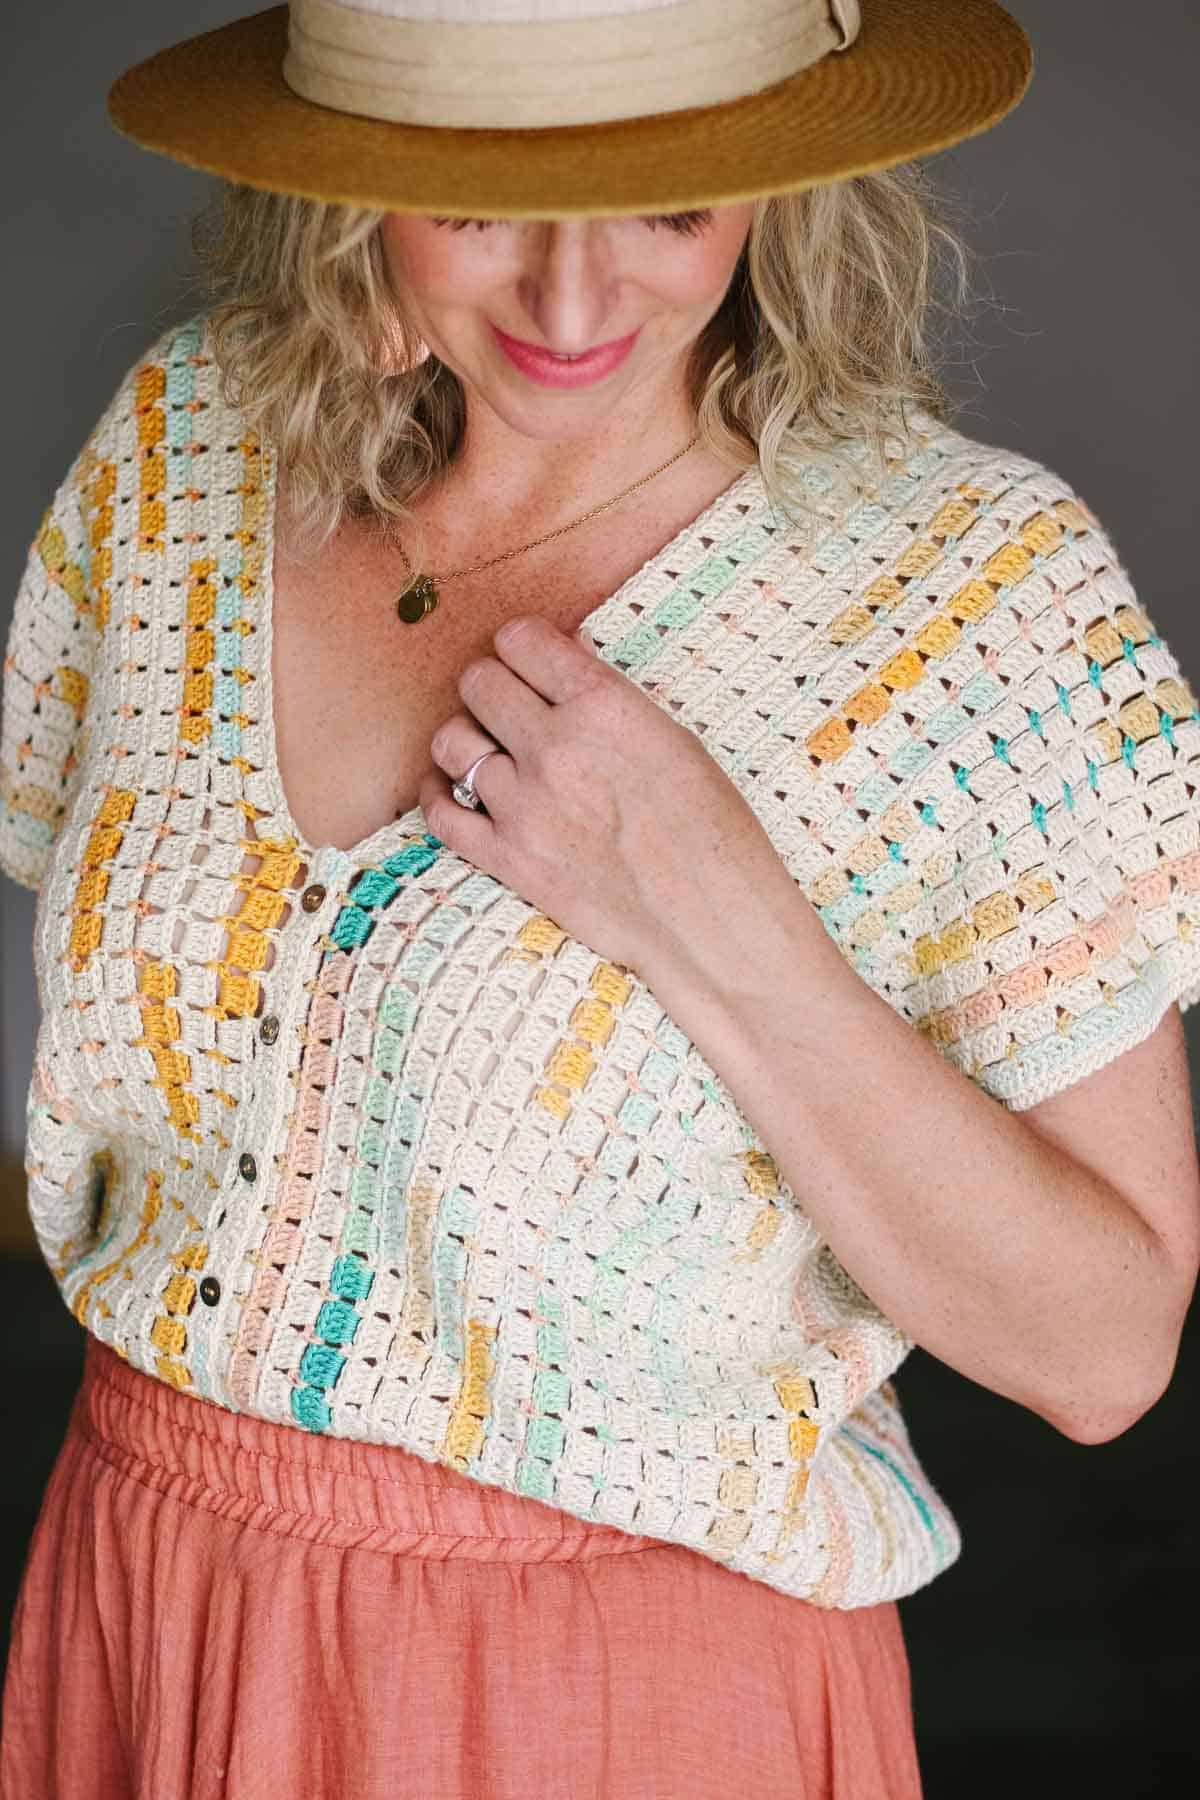 Short sleeve crochet top with buttons on a woman looking downward.